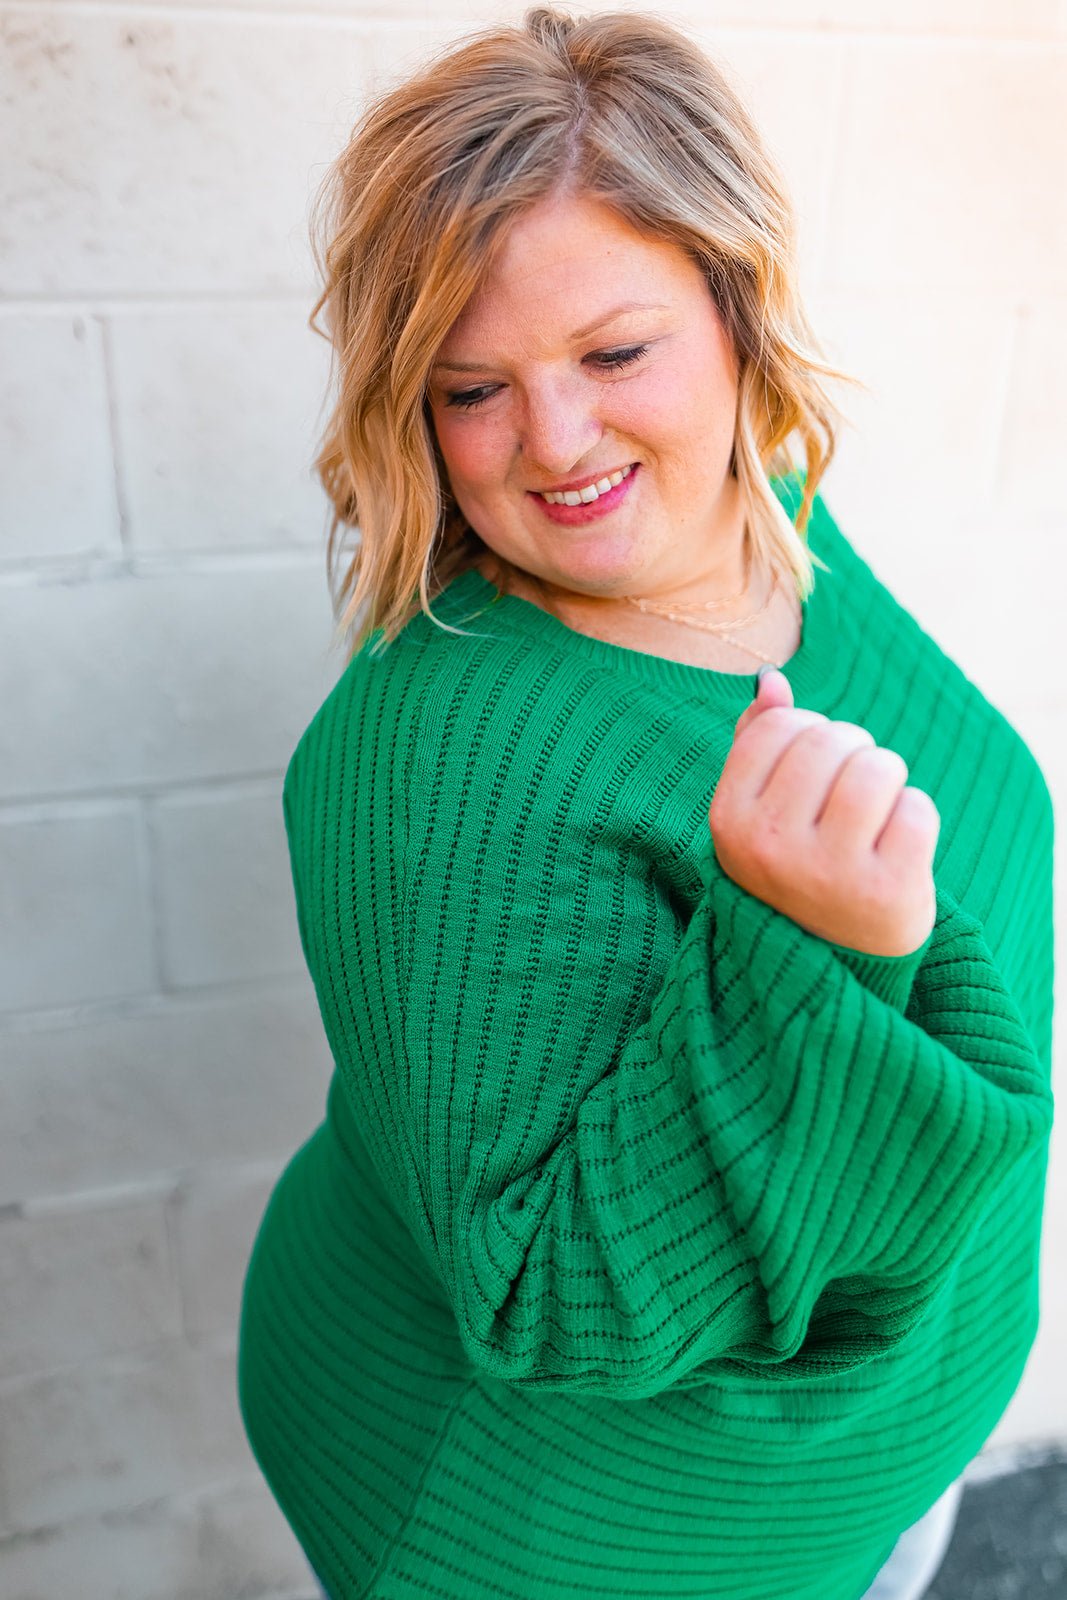 One Eleven Olive Boutique The Amaya Curvy Sweater All your friends will be green with envy-see what I did there?? In all not so seriousness, this *gorgeous* sweater is the *the* perfect green, and so so cozy!! The f